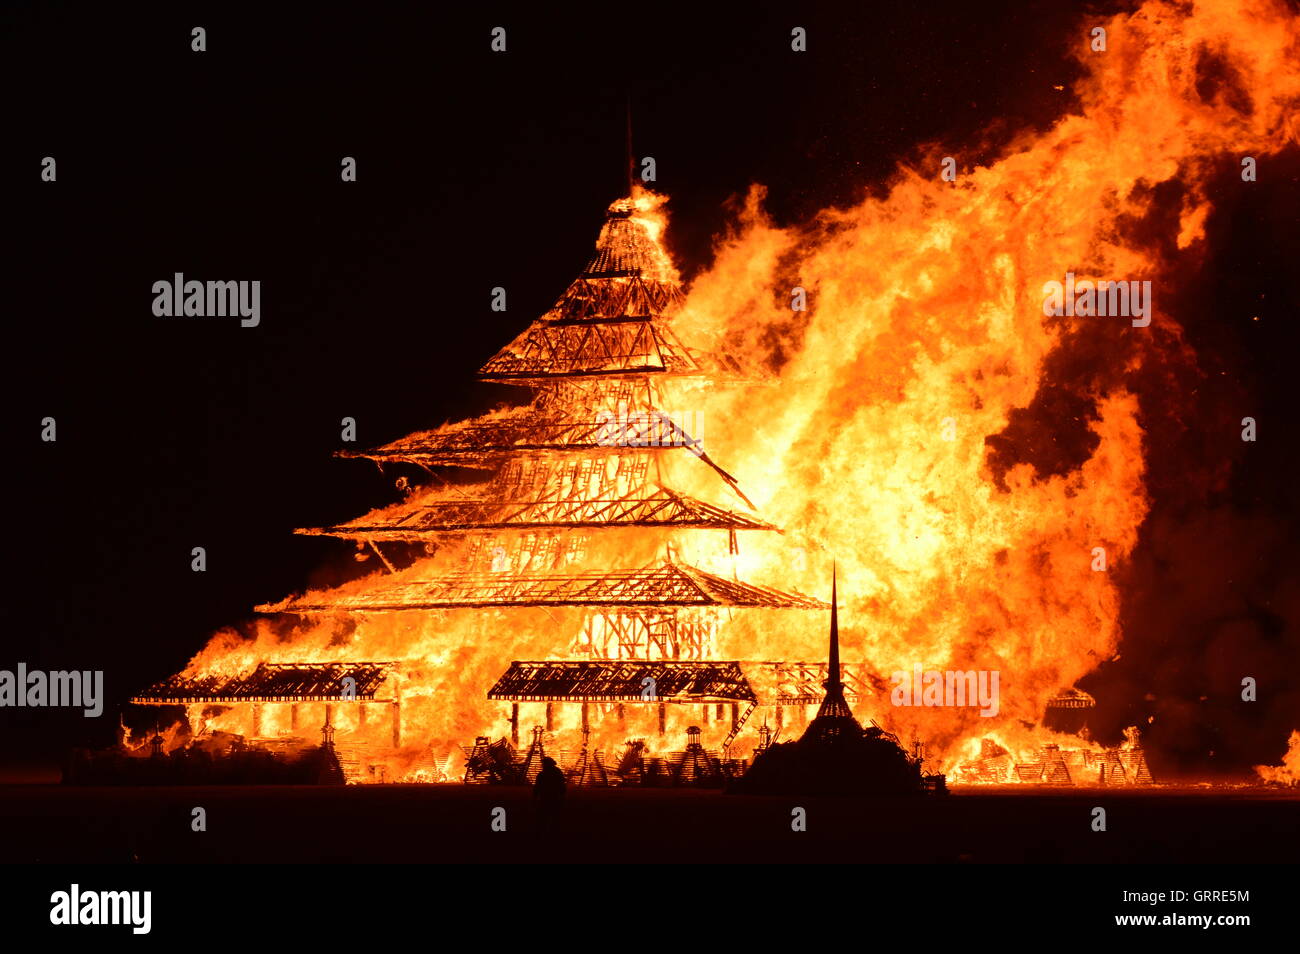 The Temple sculpture is set fire during the final celebration at the annual desert festival Burning Man September 4, 2016 in Black Rock City, Nevada. Stock Photo